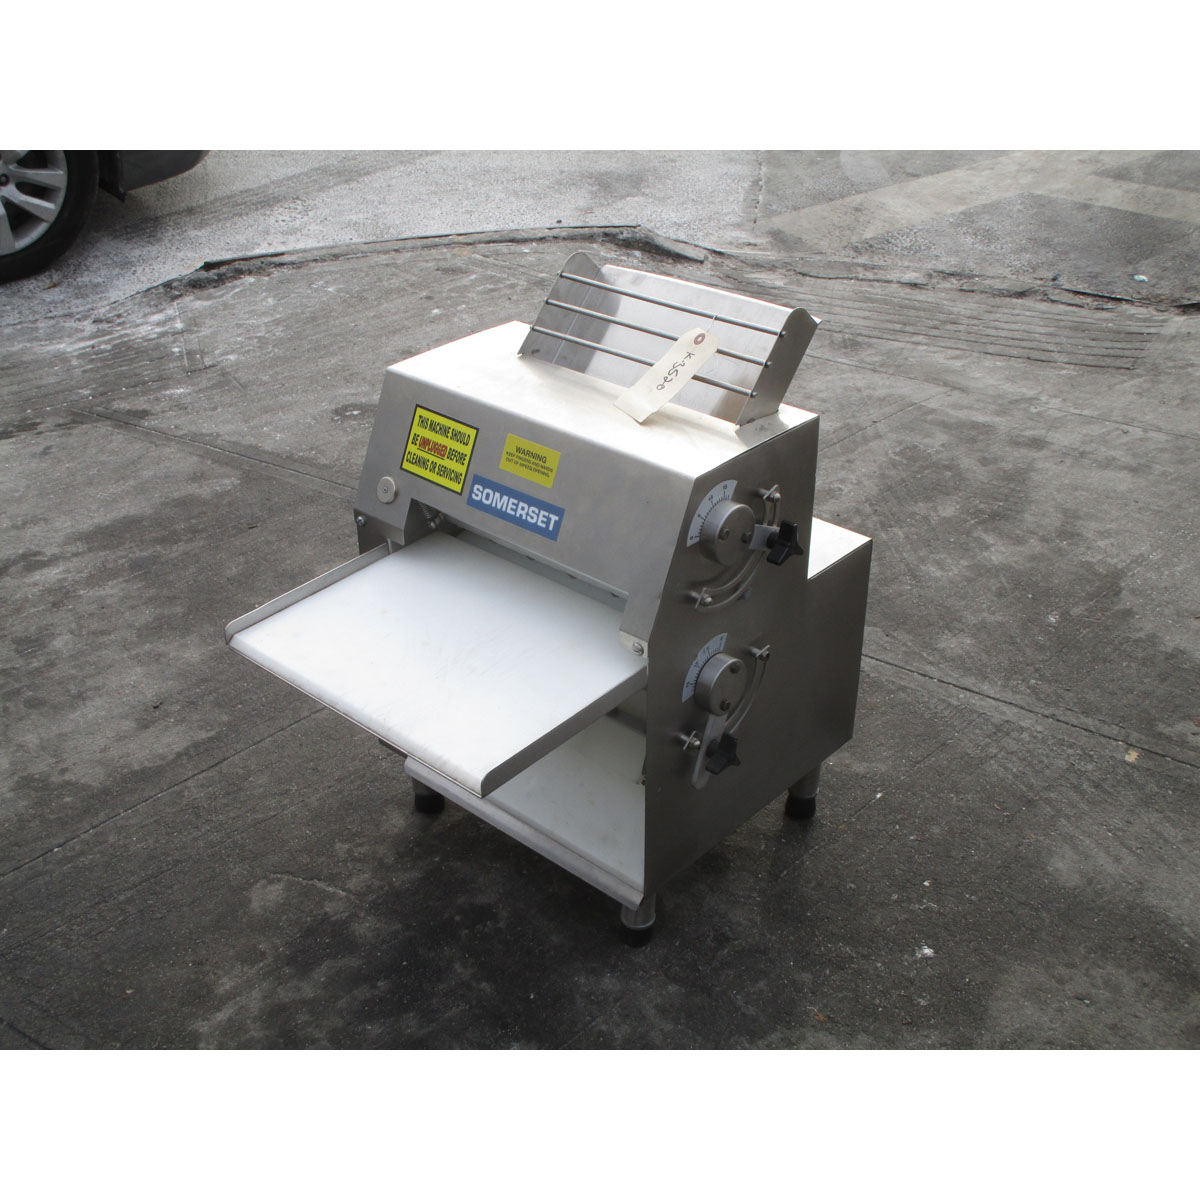 Somerset CDR-1550 Dough Sheeter/Roller, Used Working Condition image 1